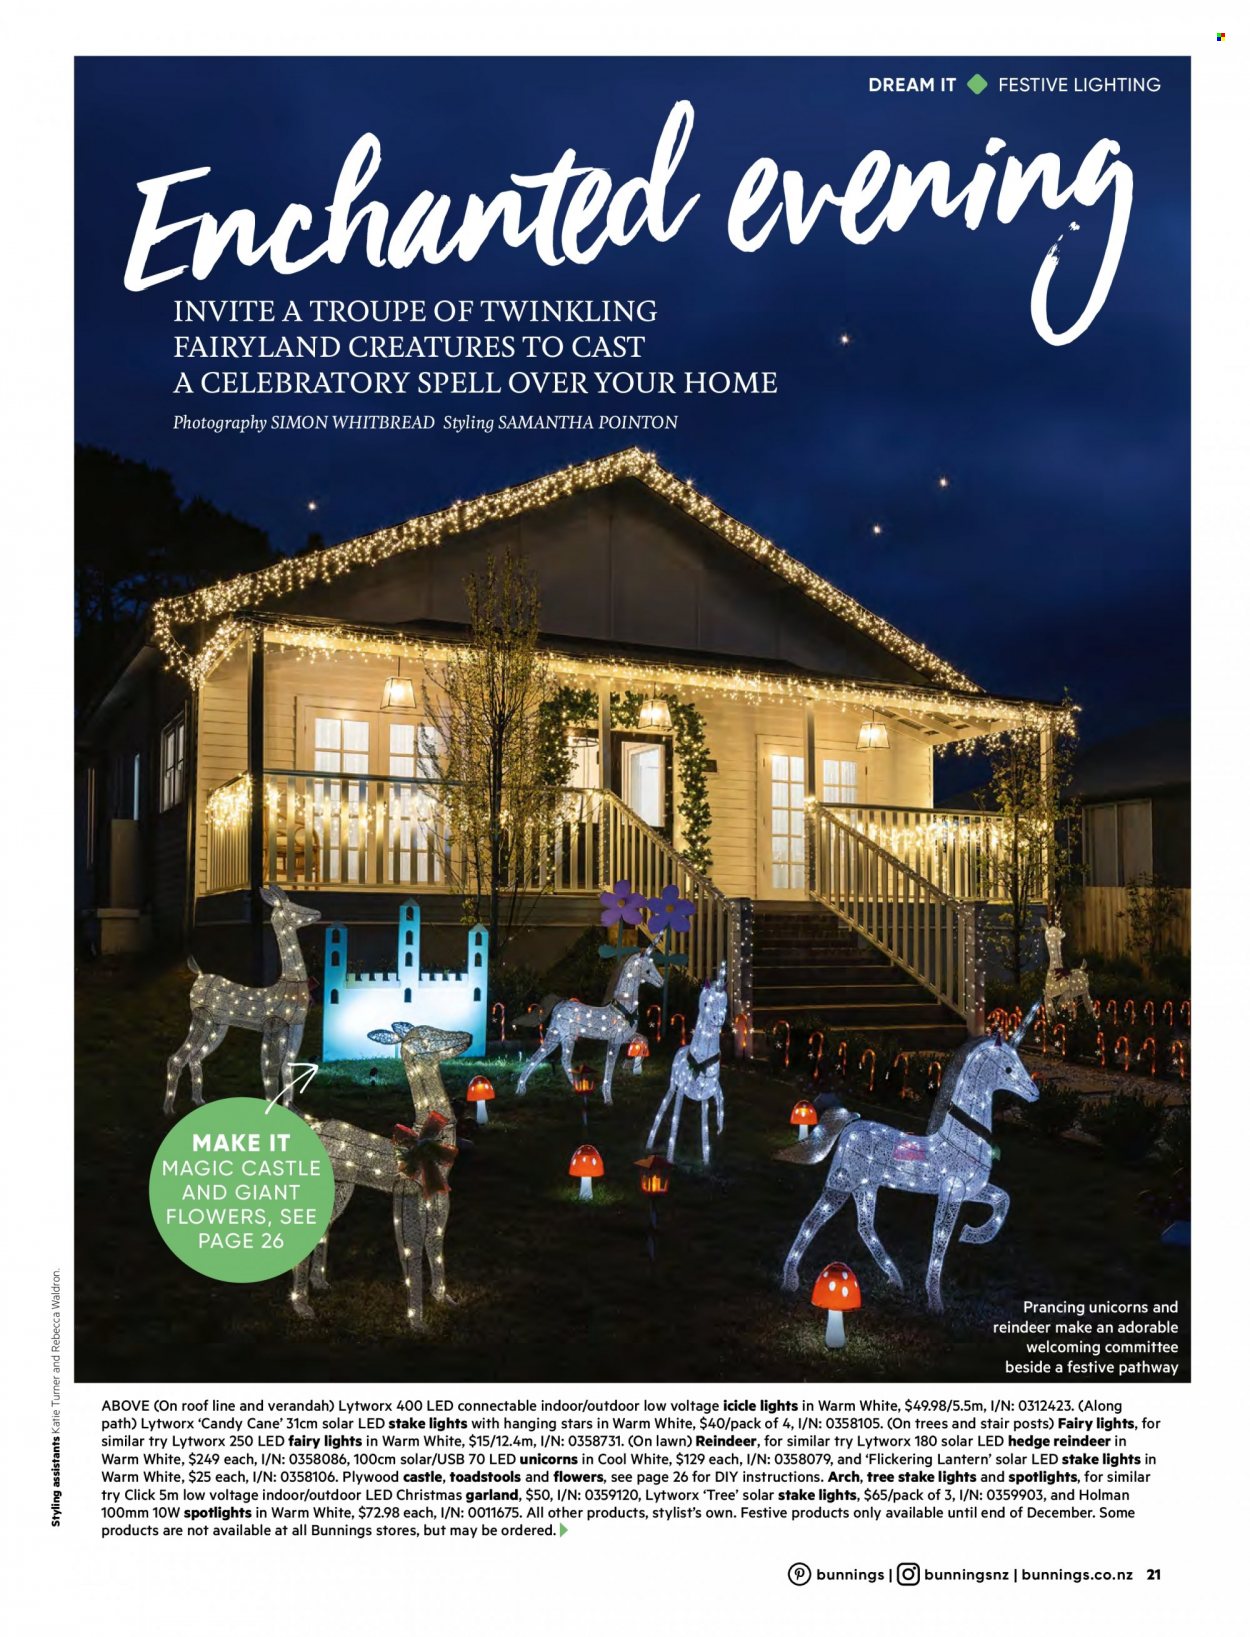 thumbnail - Bunnings Warehouse Catalogue - Sales products - reindeer, icicle light, lantern, christmas garland, garland, spotlight, solar led, lighting, solar stake, plywood. Page 21.